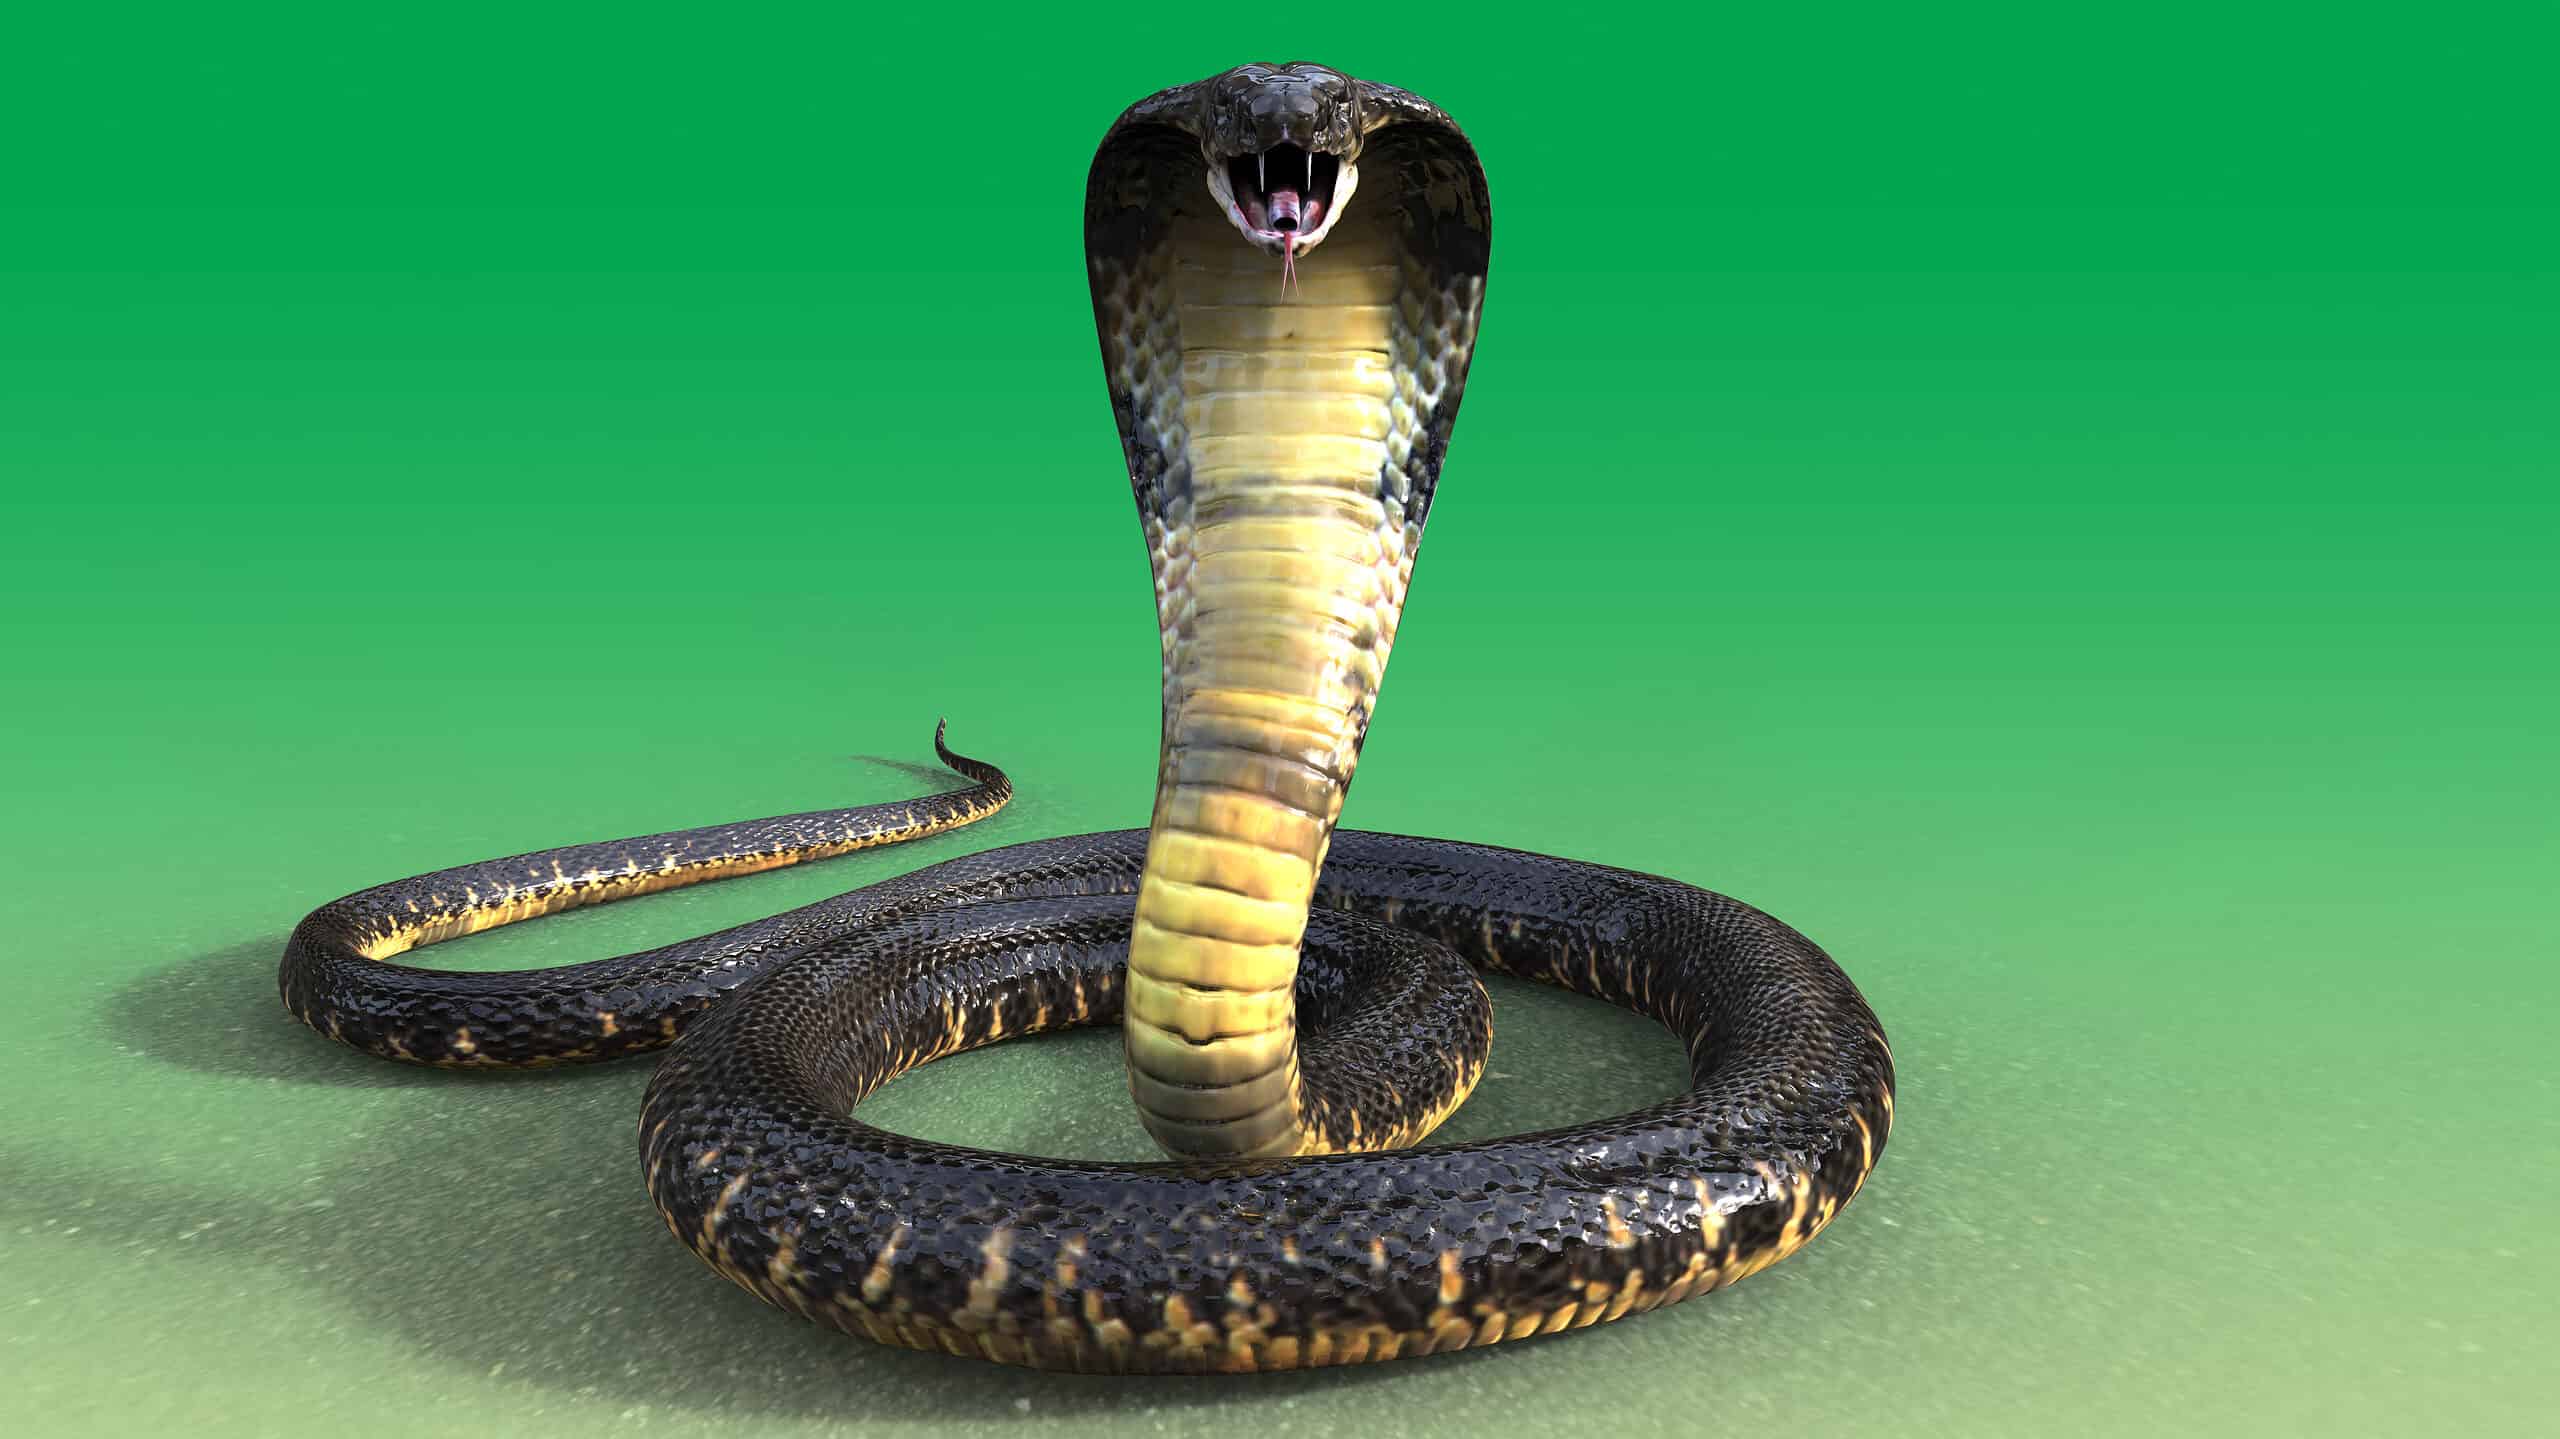 Head on view of king cobra against a green background